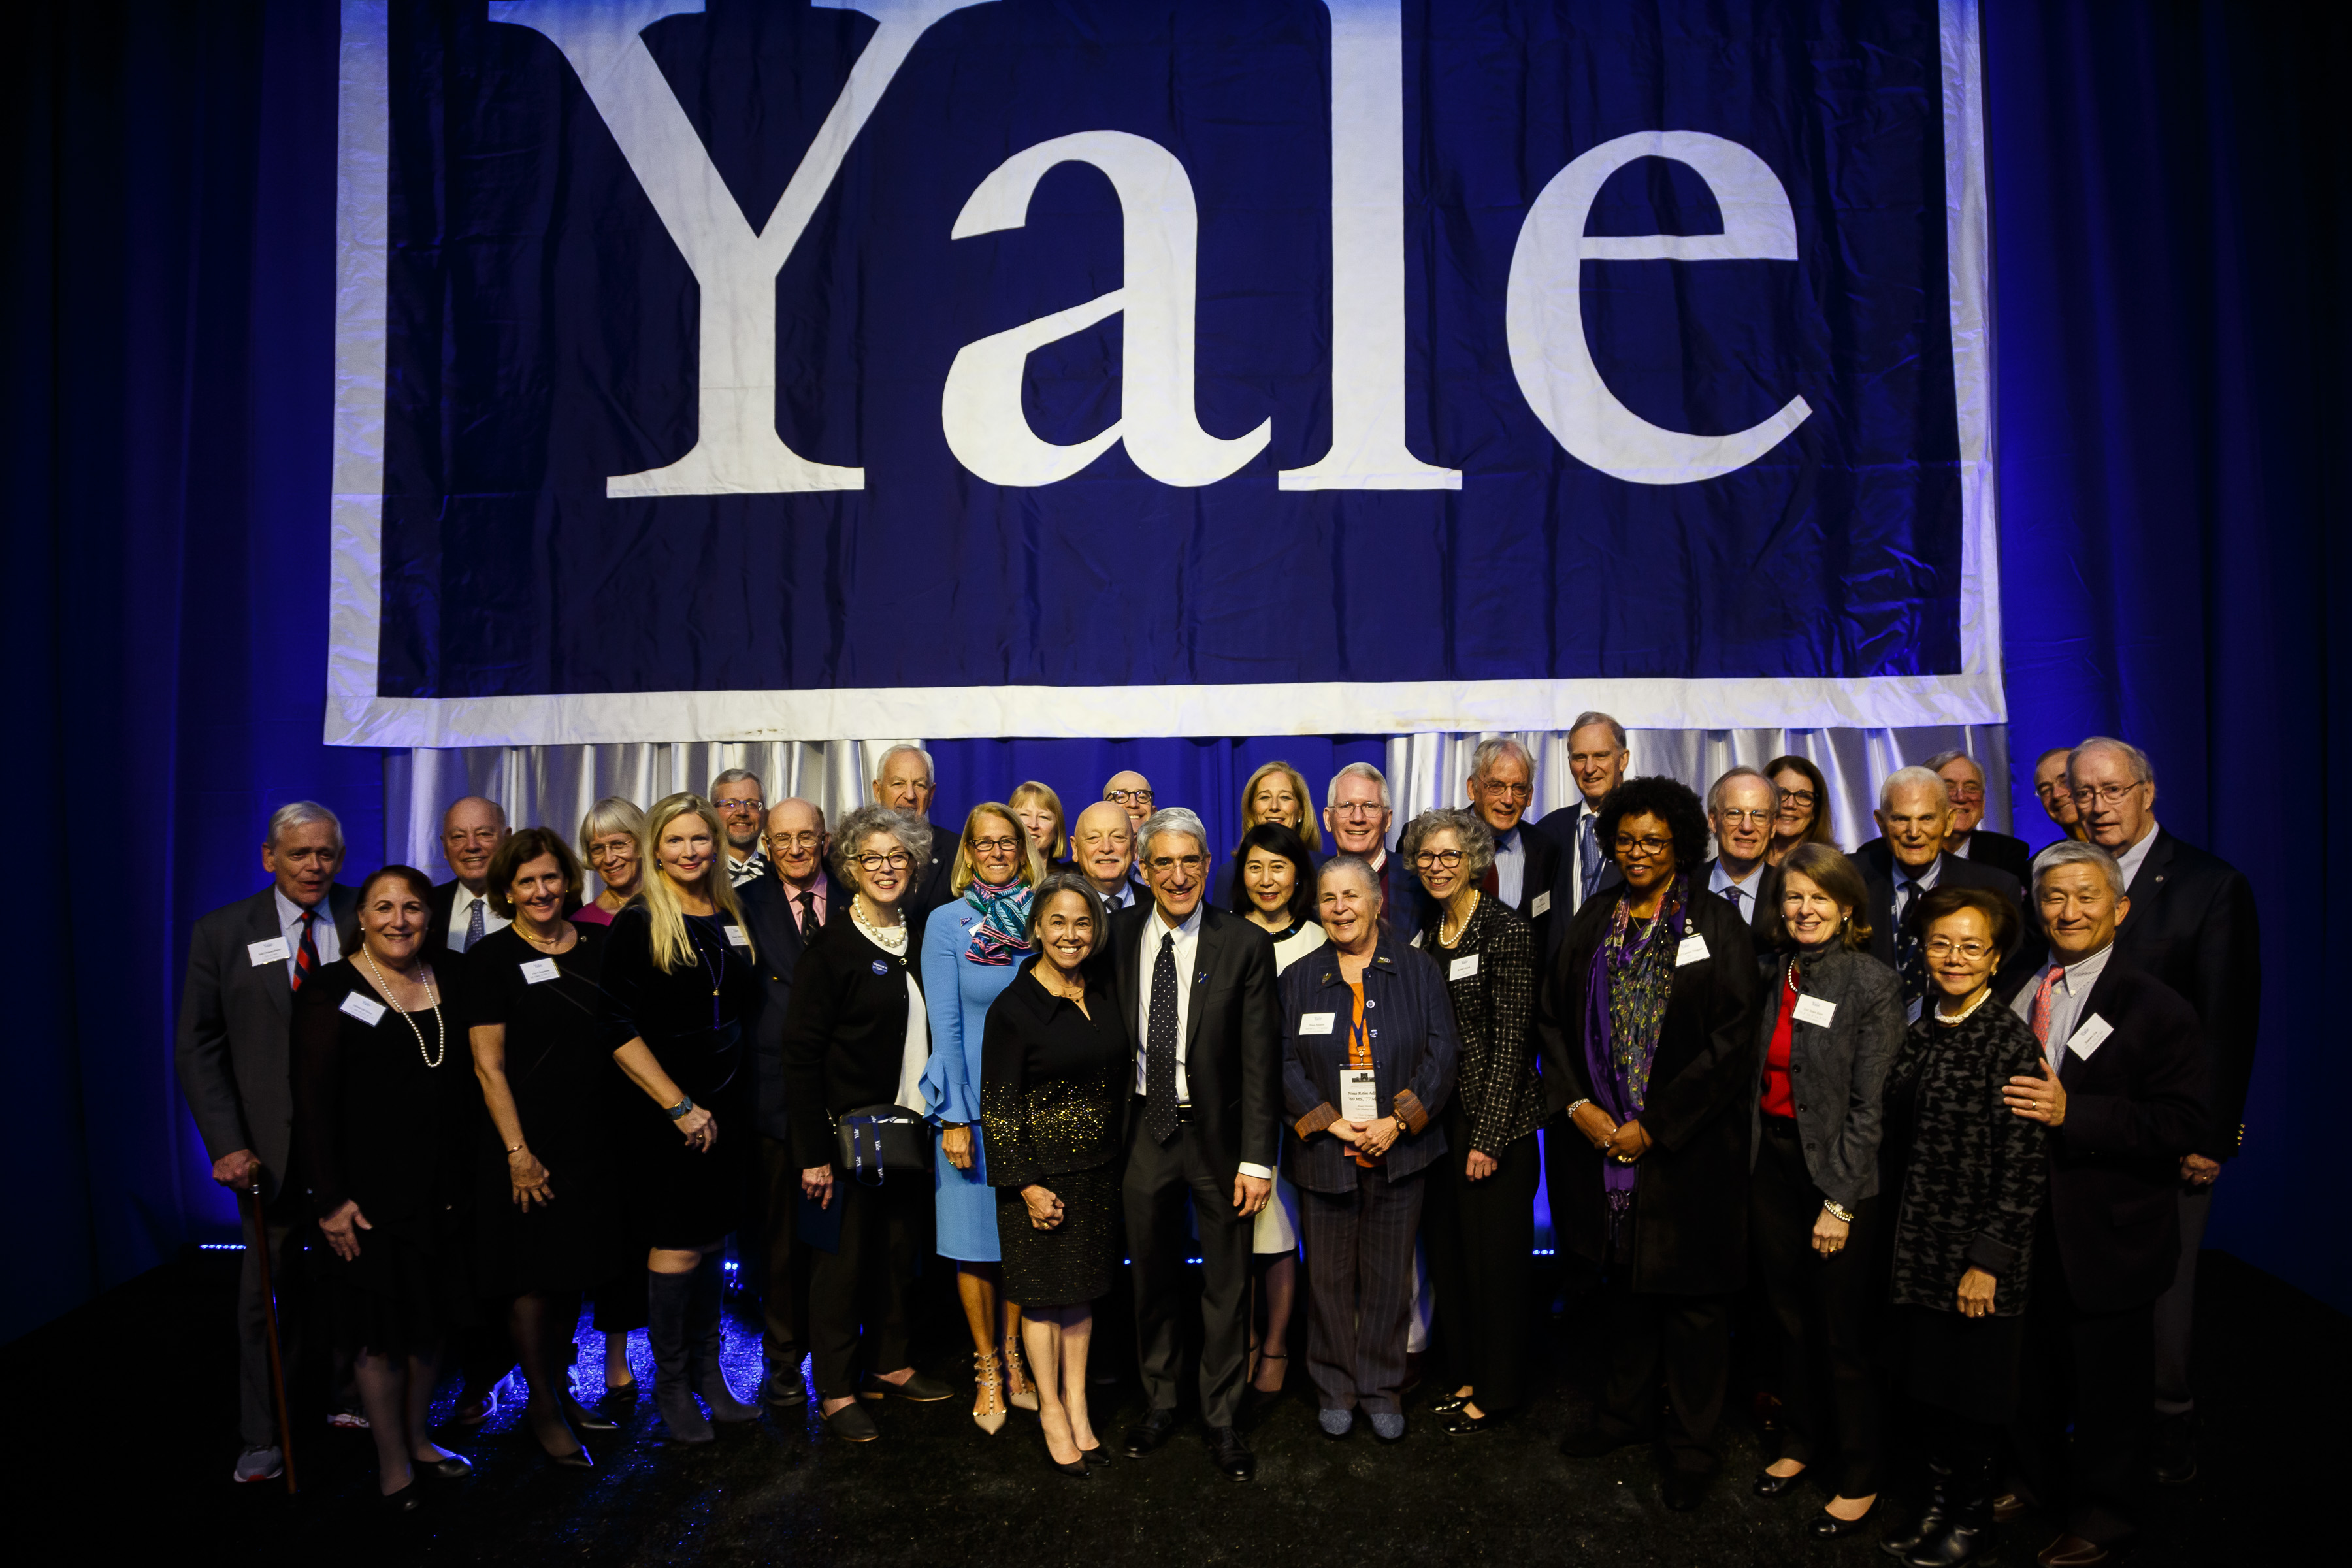 All Yale medalists in attendance at 2019 Assembly and Convocation gather for a group photo.